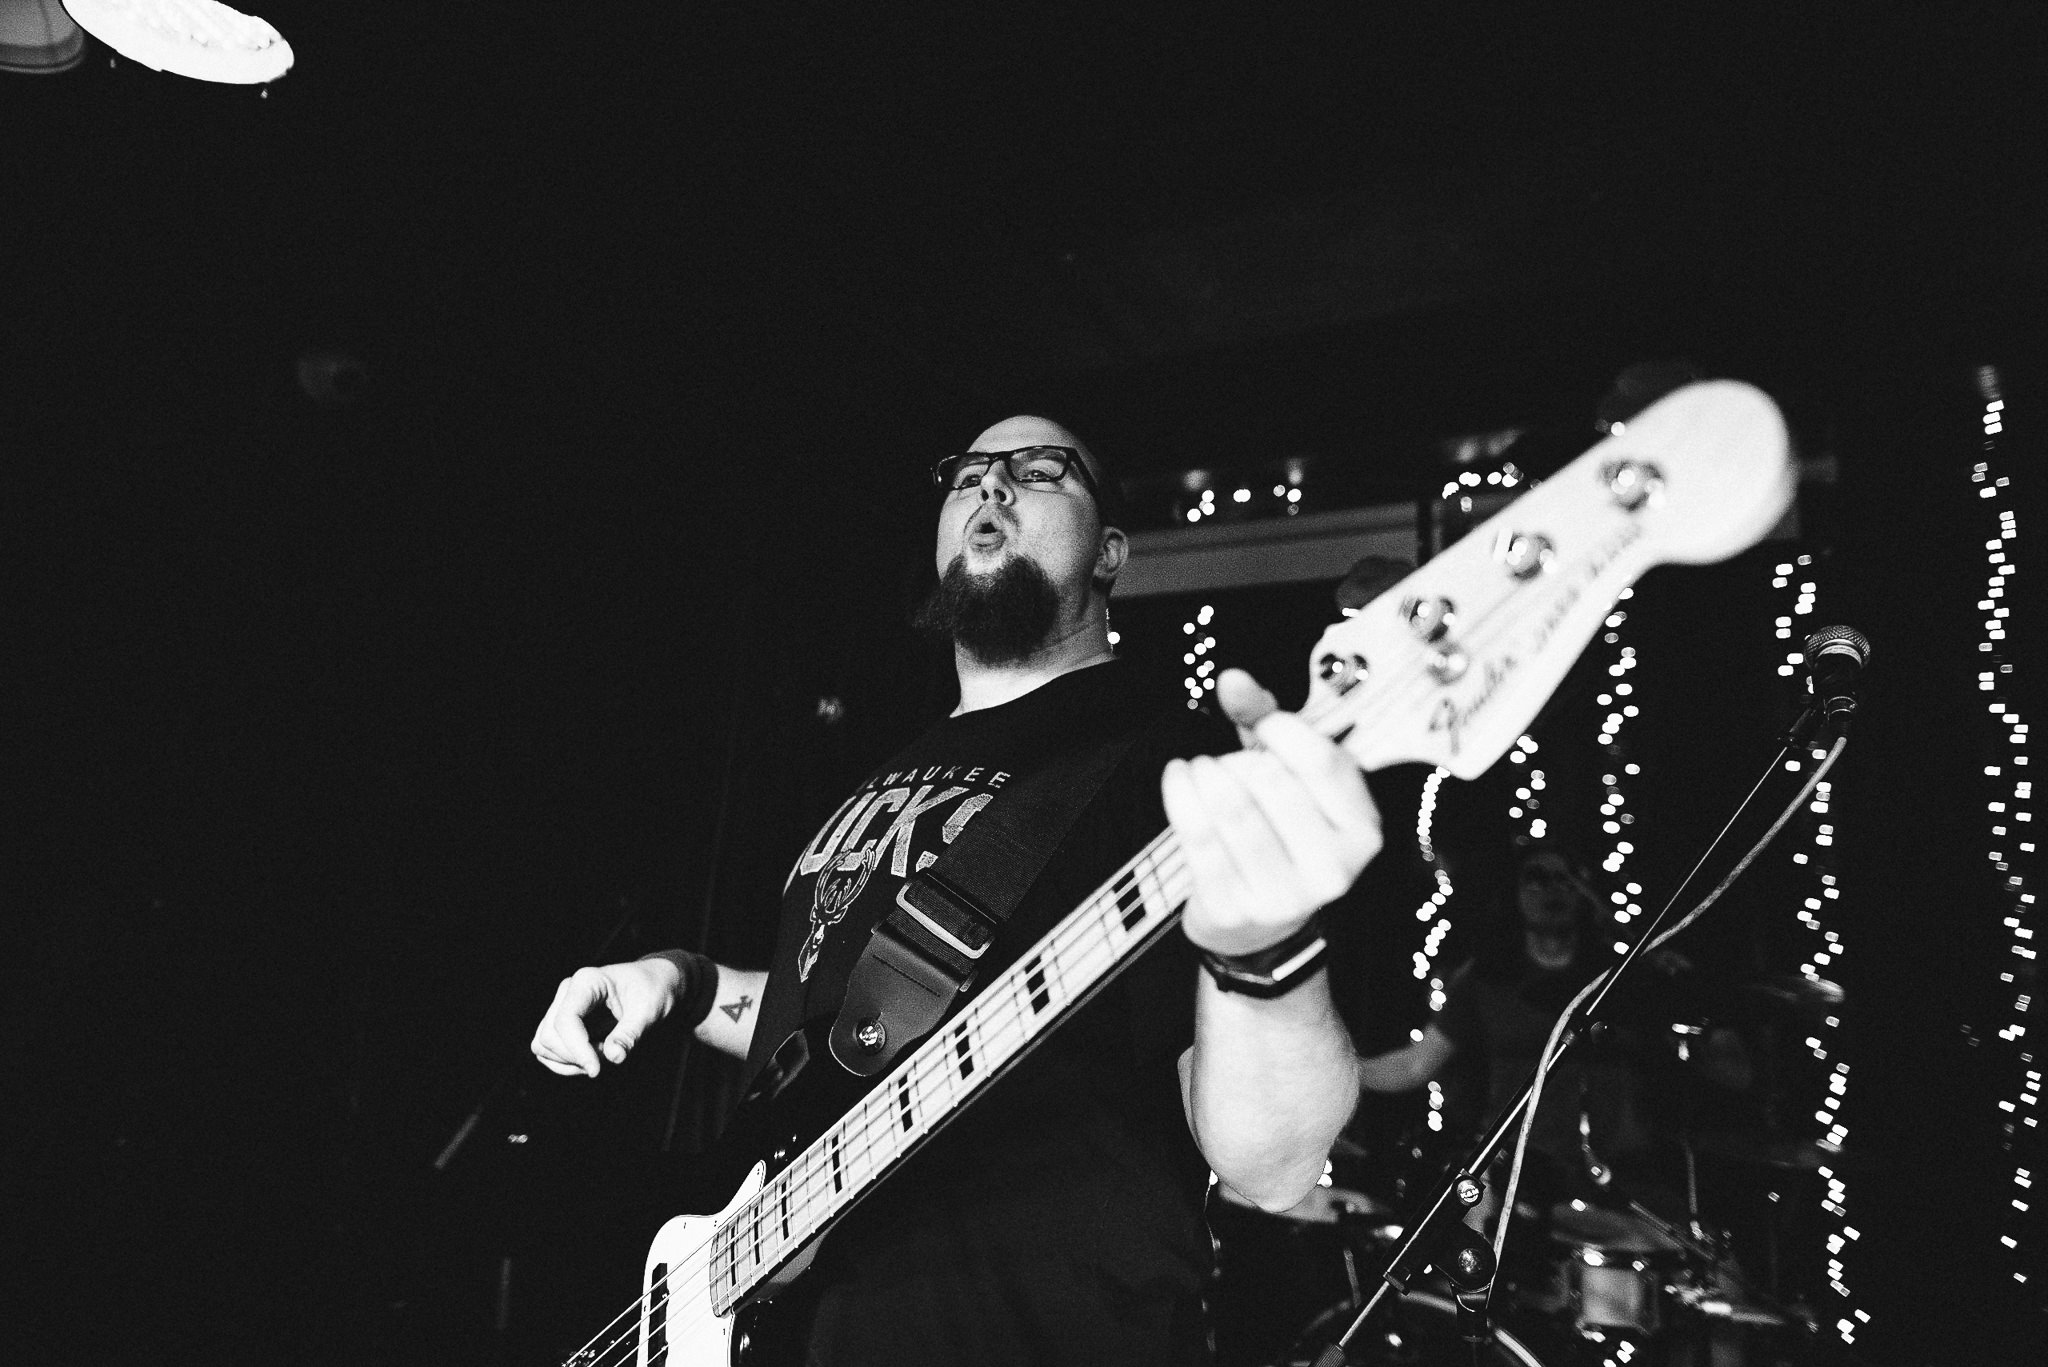 Christopher Goggins on the bass